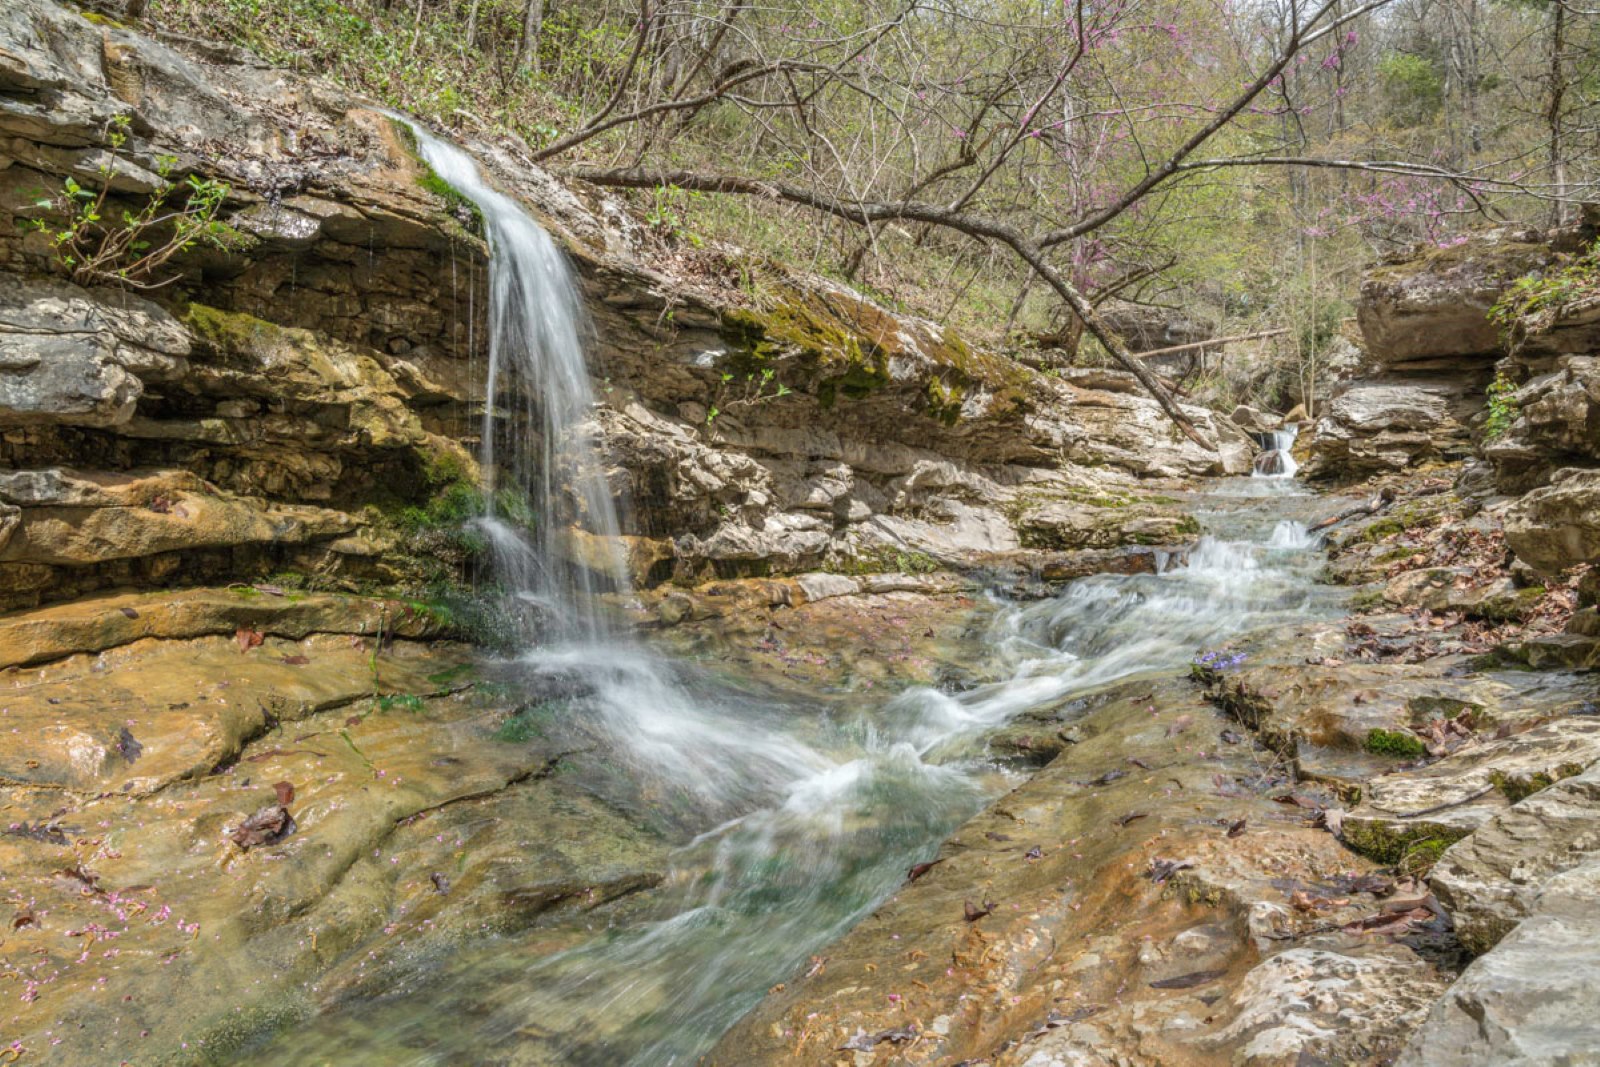 This spring waterfall is located a short way downstream from Broadwater Hollow Falls. It can be viewed from a rocky platform to its right, or from the left side, as shown, by hiking around a boulder. (Photo by Sony Hocklander)